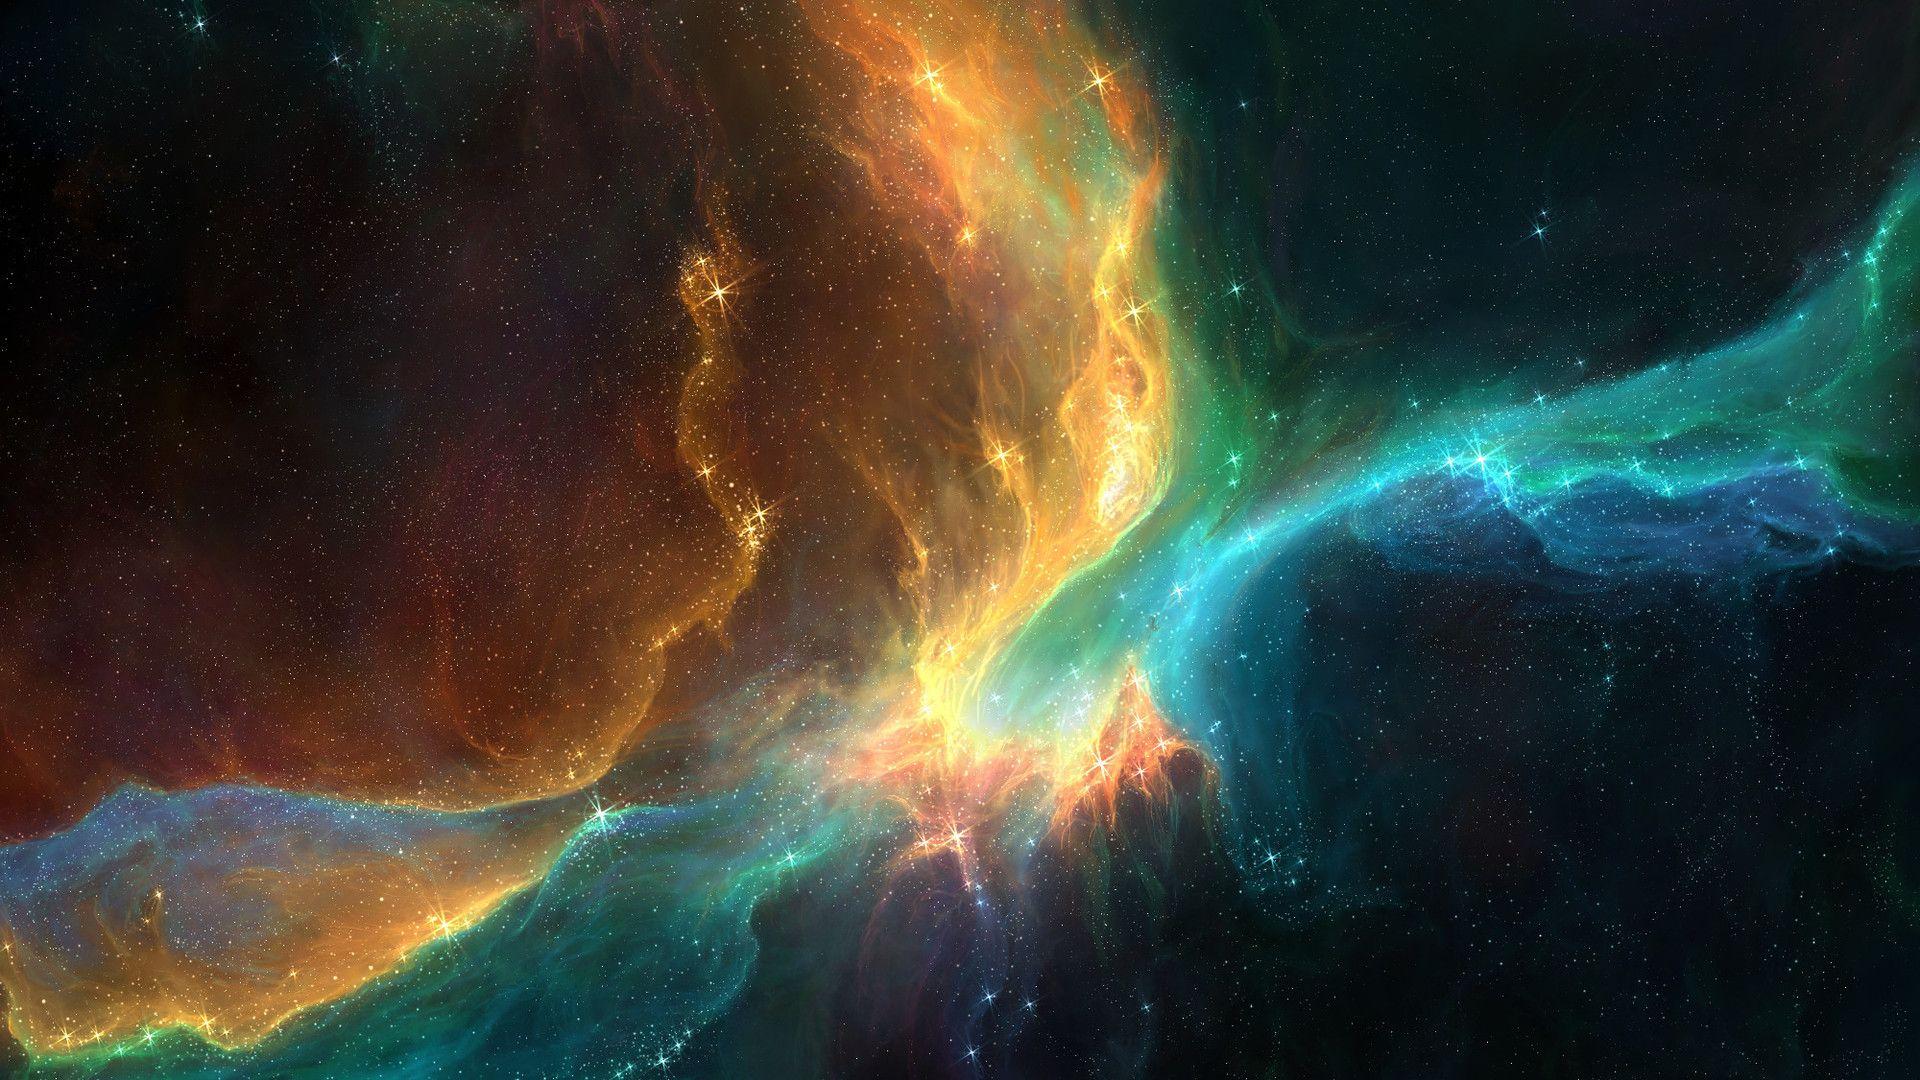 hd wallpapers 1080p space